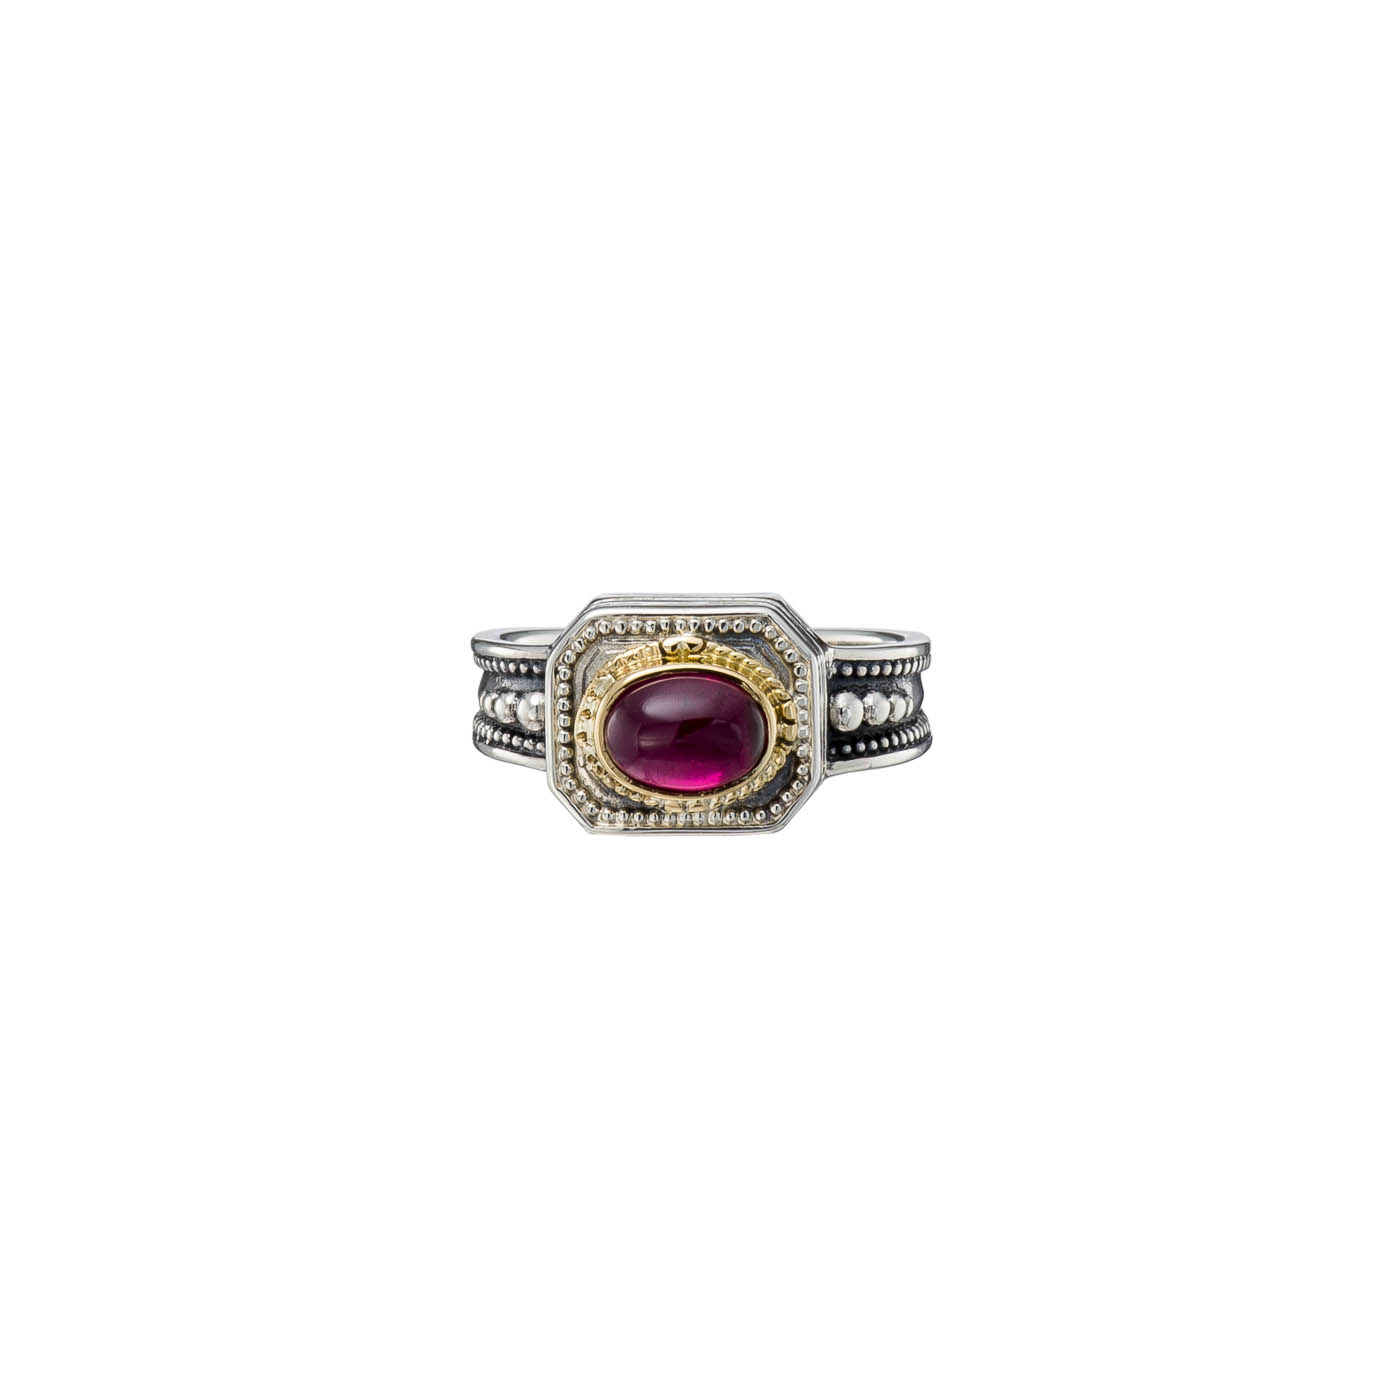 Cyclades Ring in 18K Gold and sterling silver with garnet